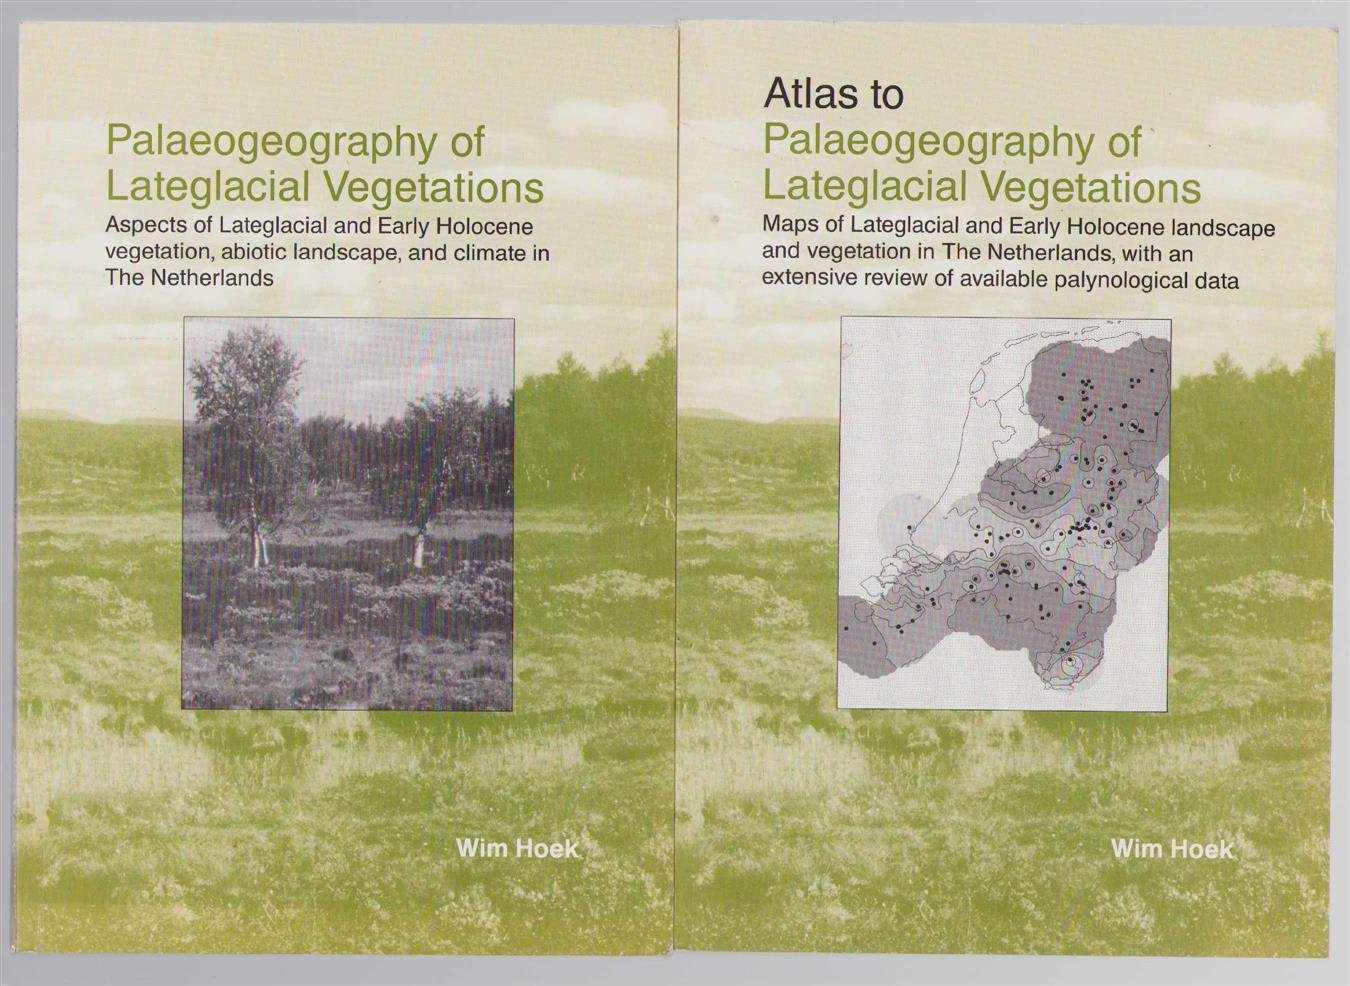 WZ Hoek - Palaeogeography of lateglacial vegetations : aspects of lateglacial and early holocene vegetation, abiotic landscape, and climate in The Netherlands + Atlas  .... idem